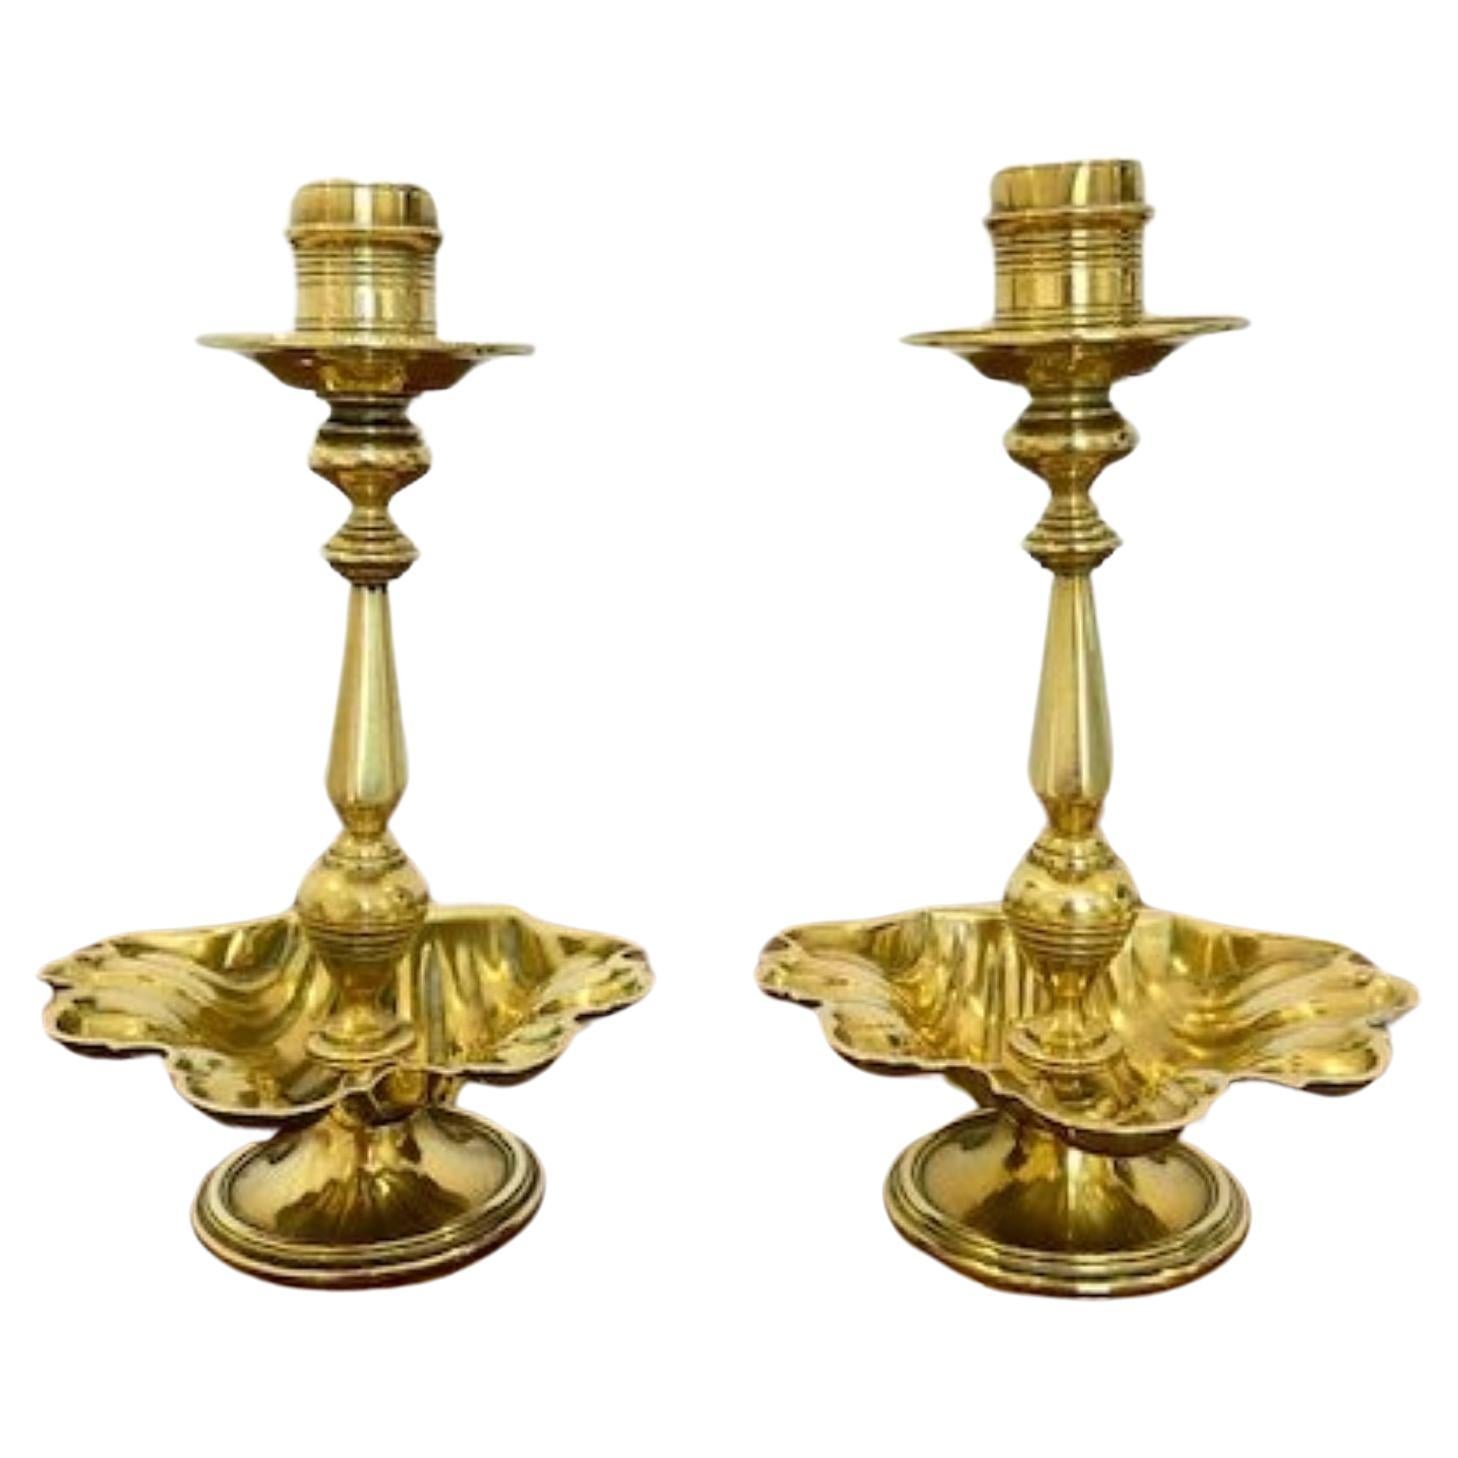 Unusual Pair of Antique Brass Candlesticks For Sale